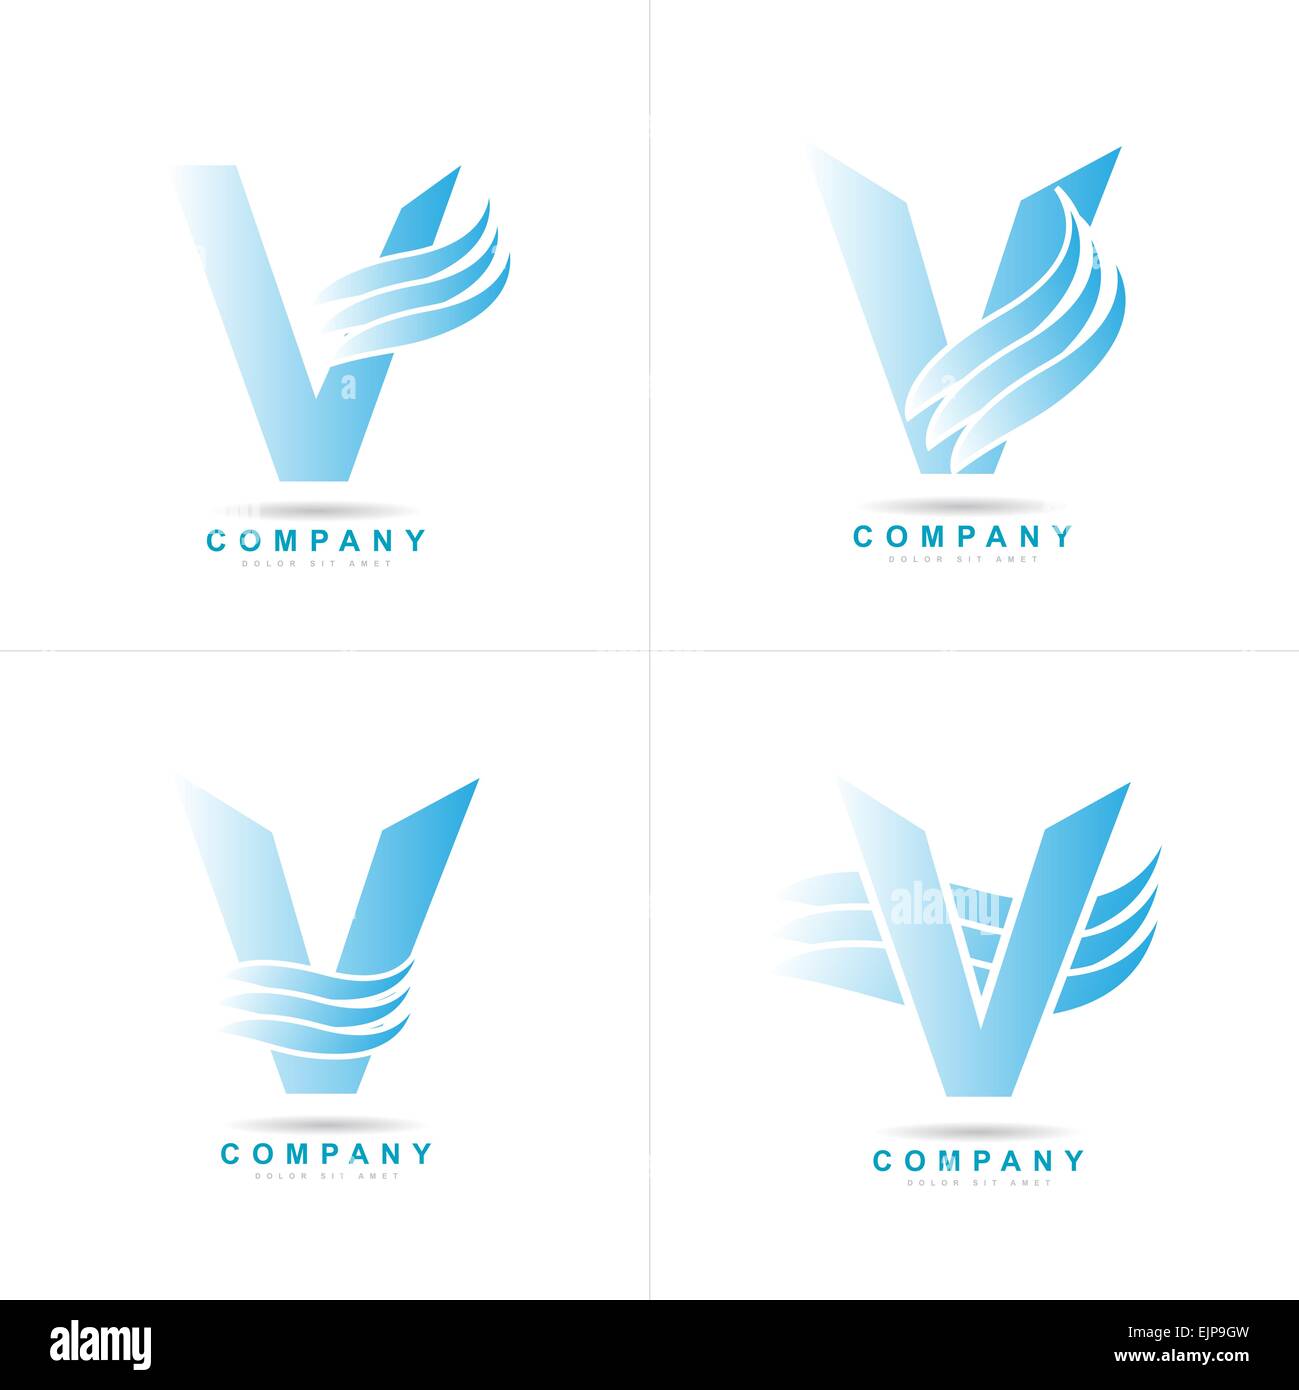 Vl tech logo Cut Out Stock Images & Pictures - Alamy